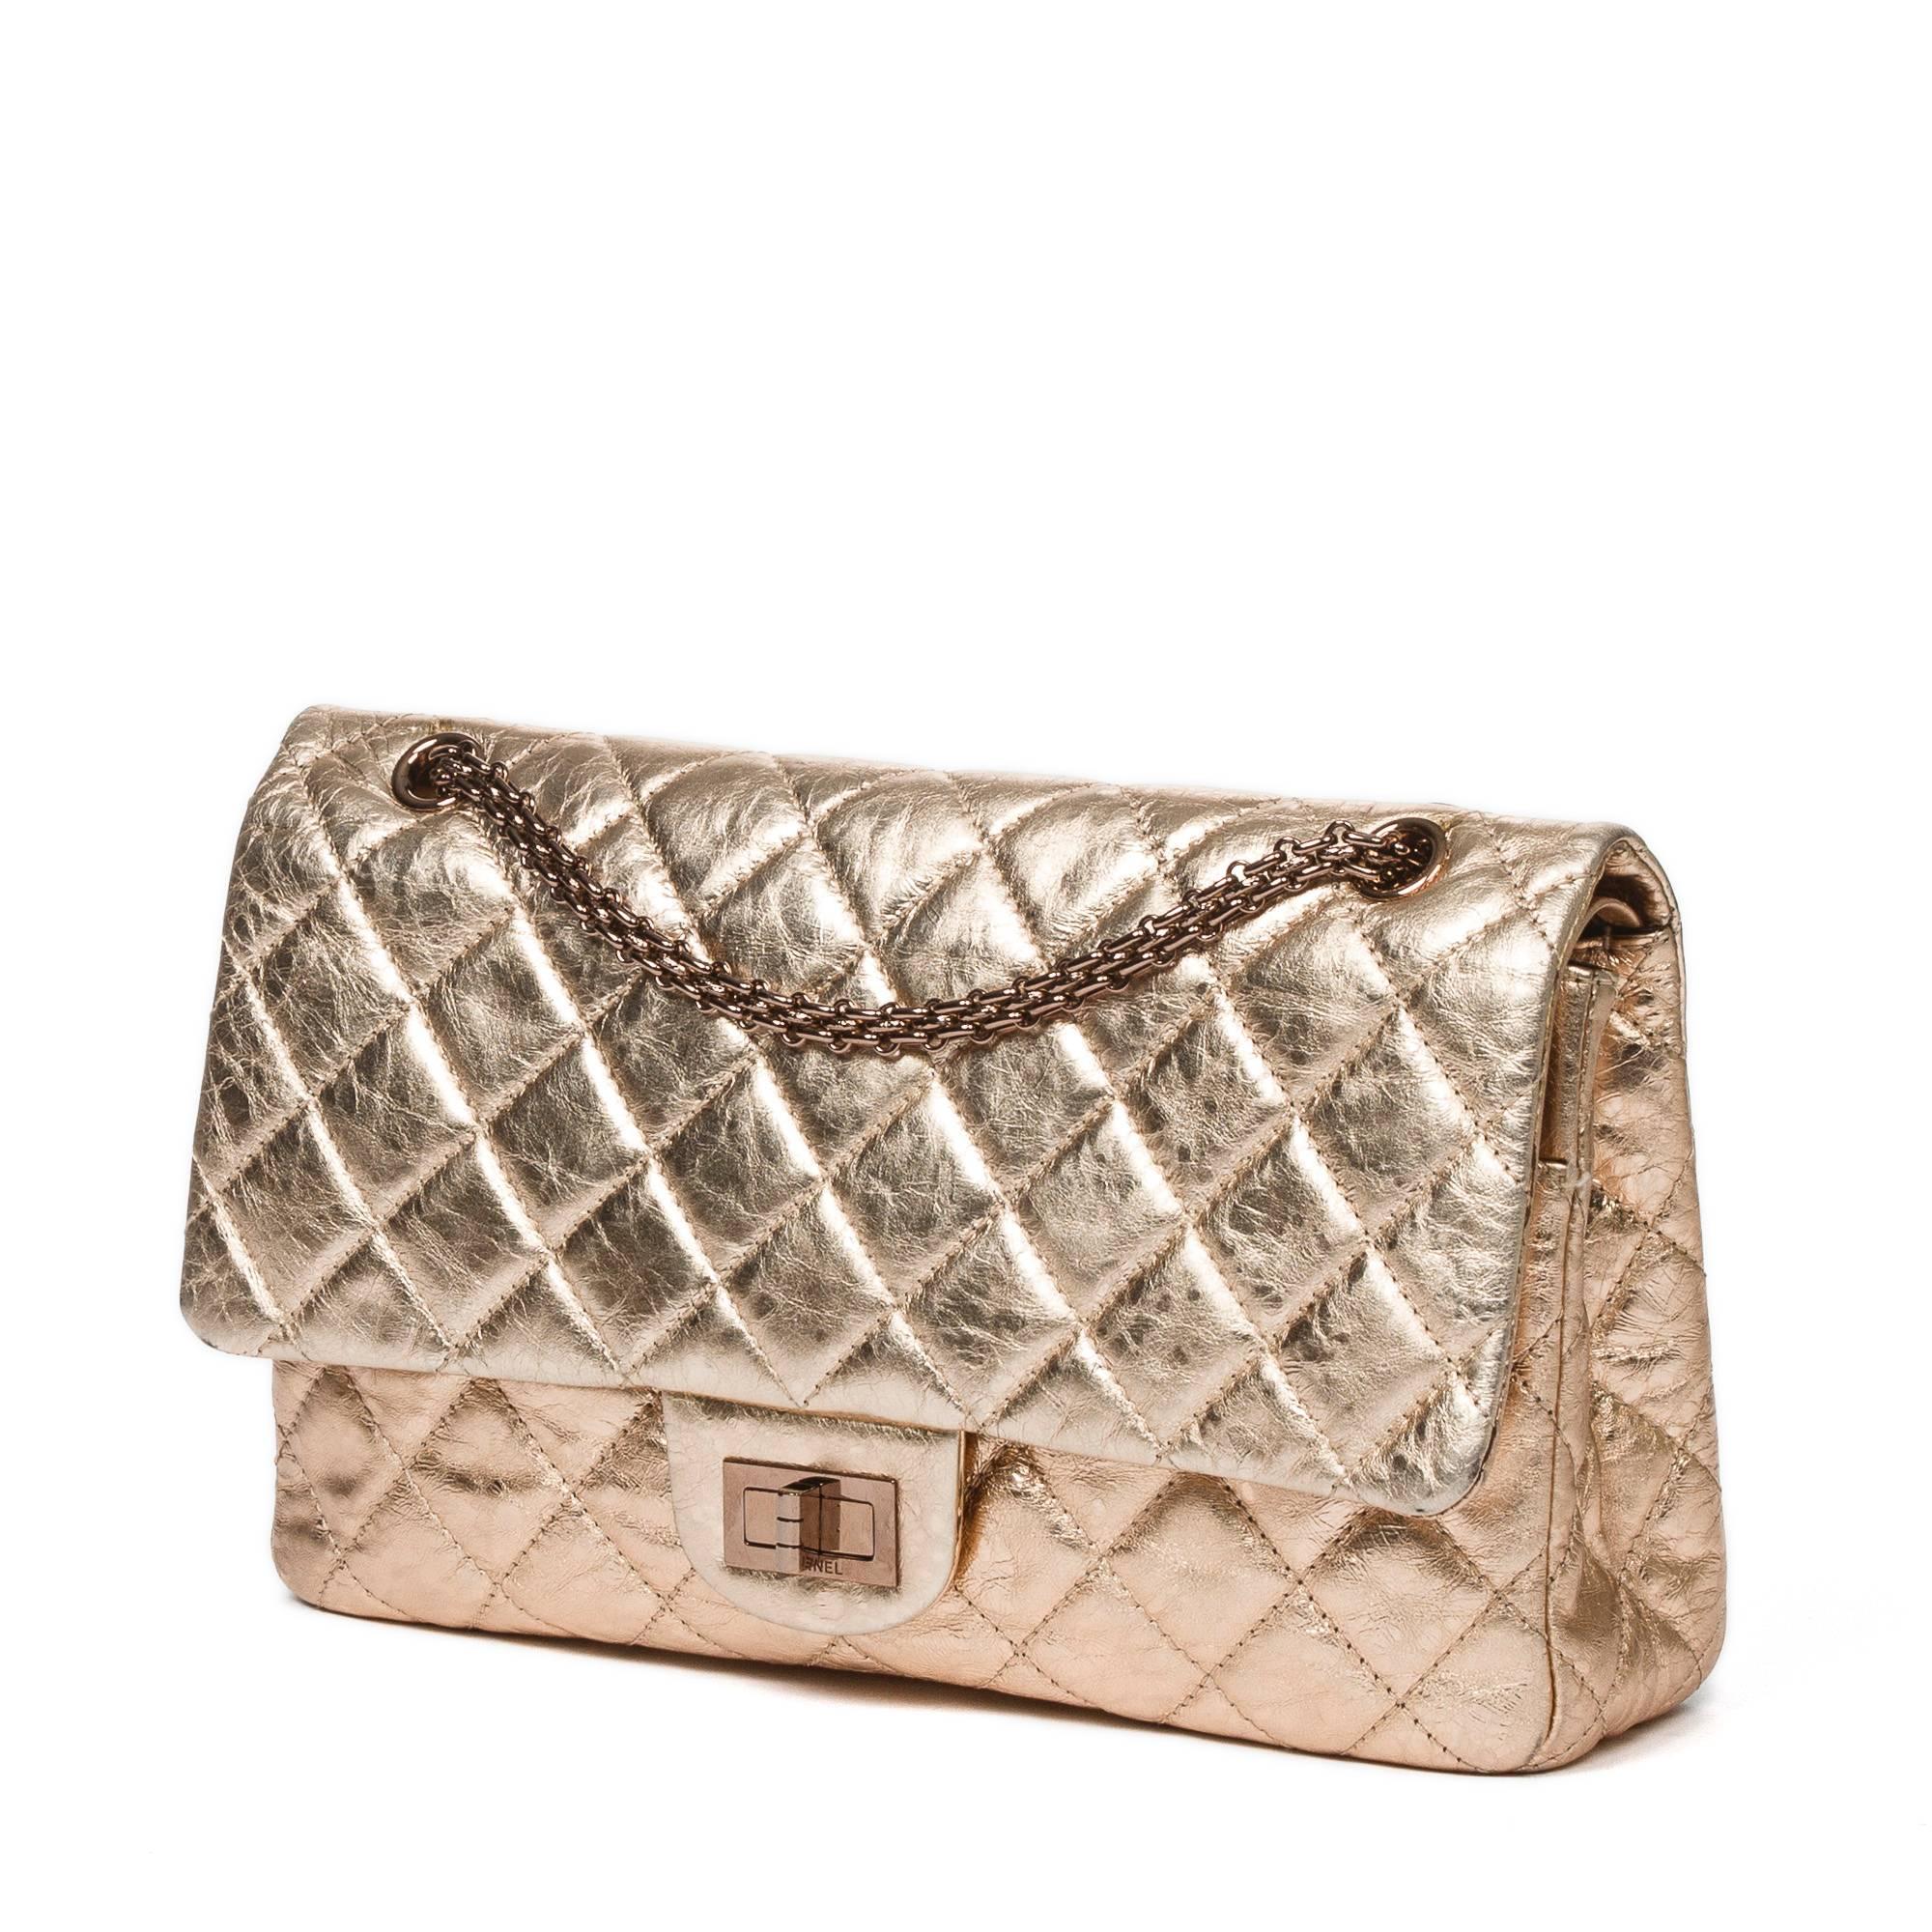 Reissue Jumbo Double Flap in pink gold quilted distressed calf leather with double chain strap and 